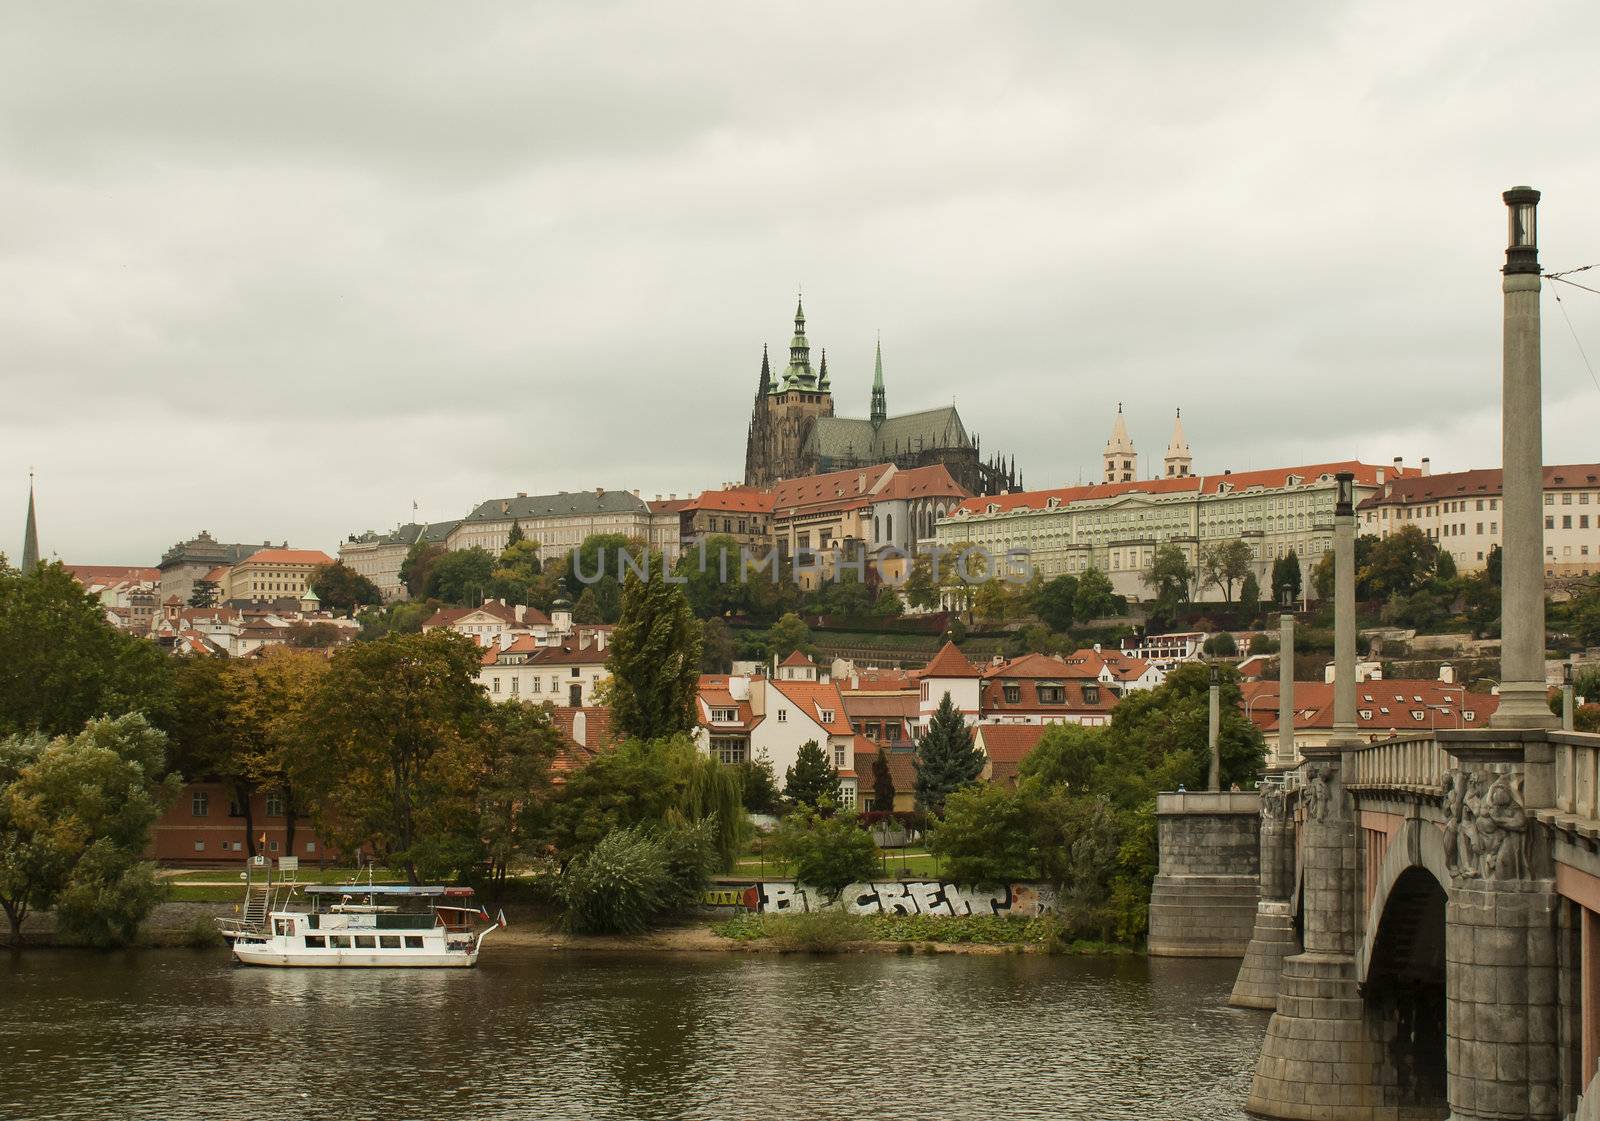 Castle and Charles bridge in Prague at the day time by AndreyKr